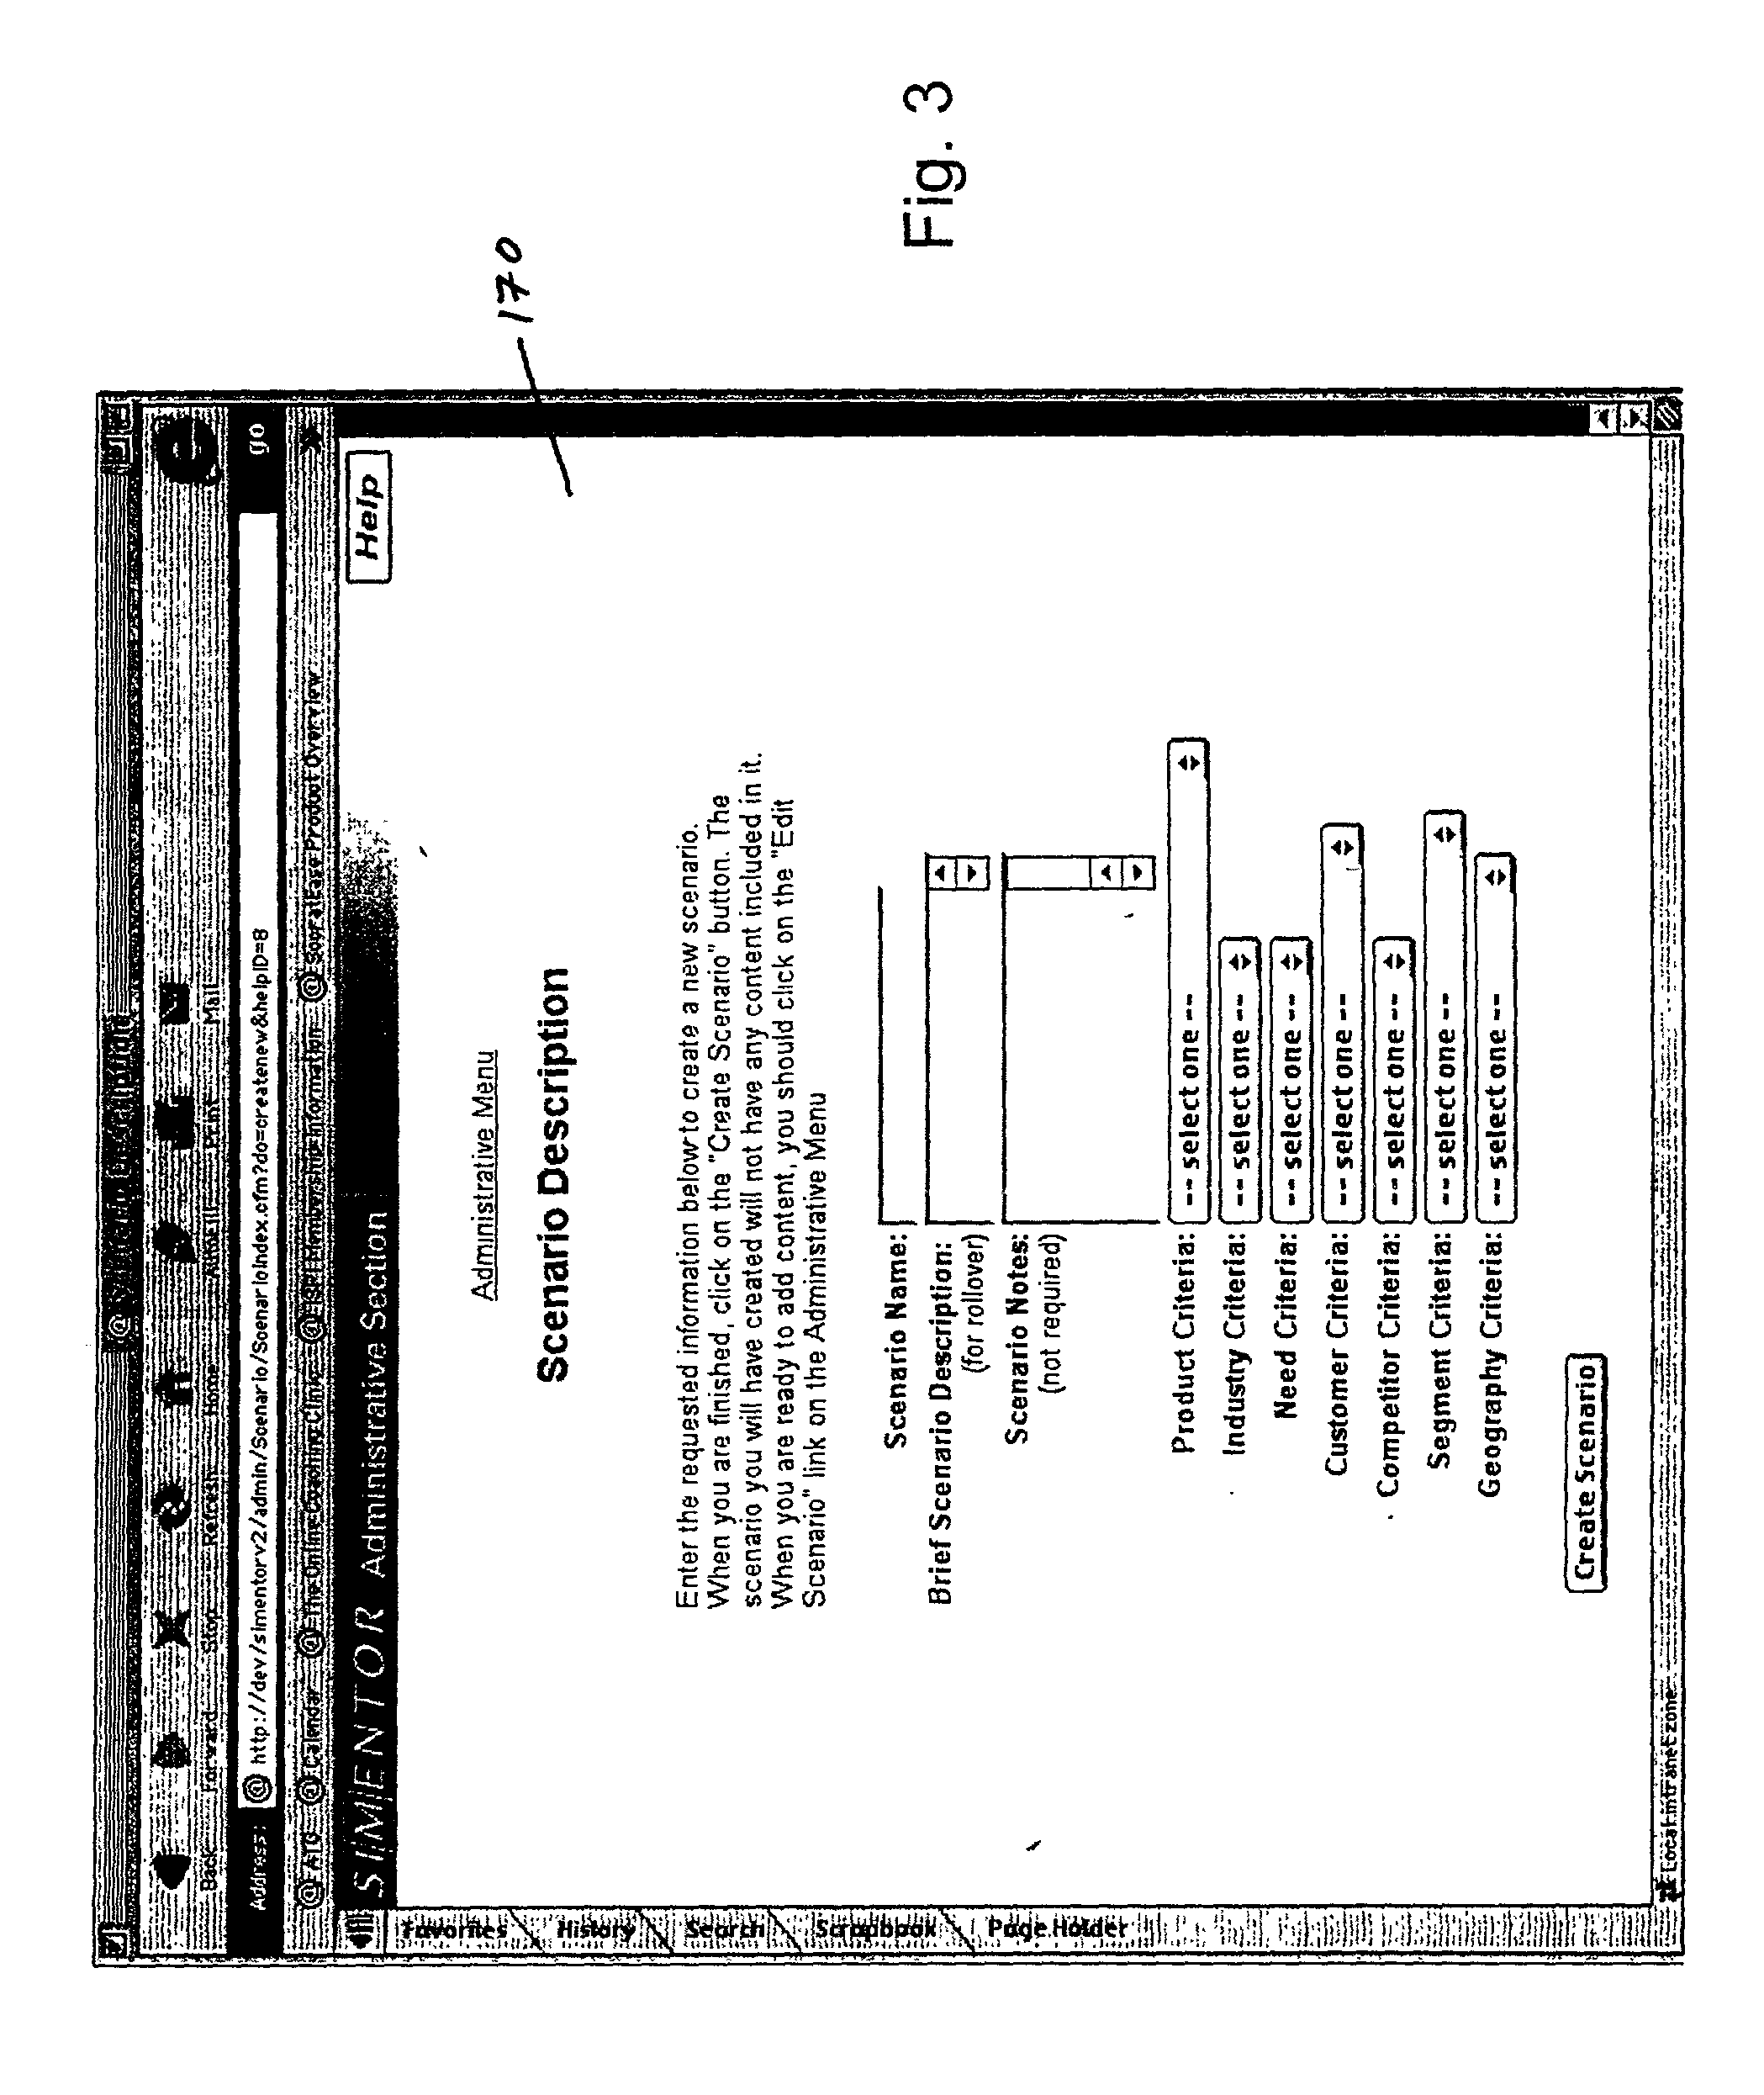 Interactive training system and method